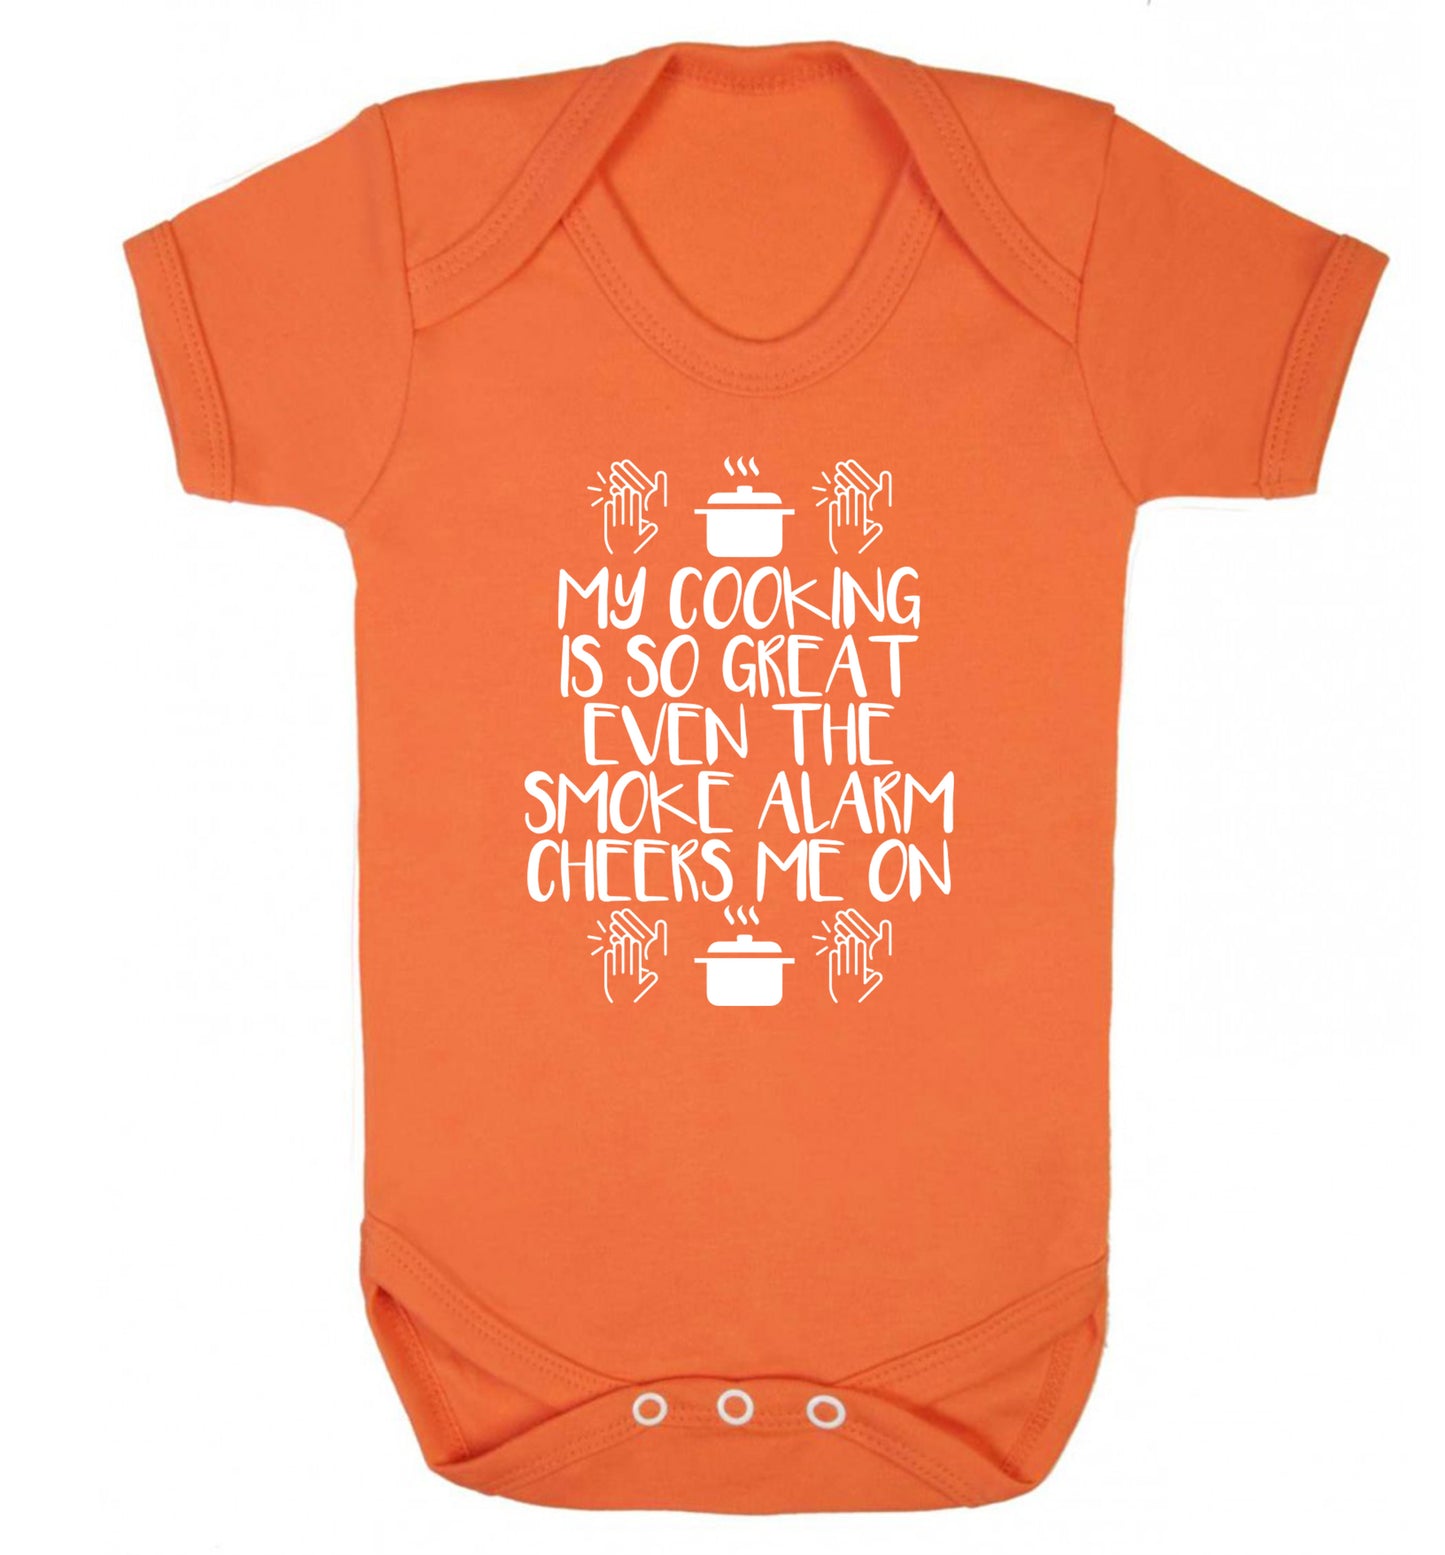 My cooking is so great even the smoke alarm cheers me on! Baby Vest orange 18-24 months